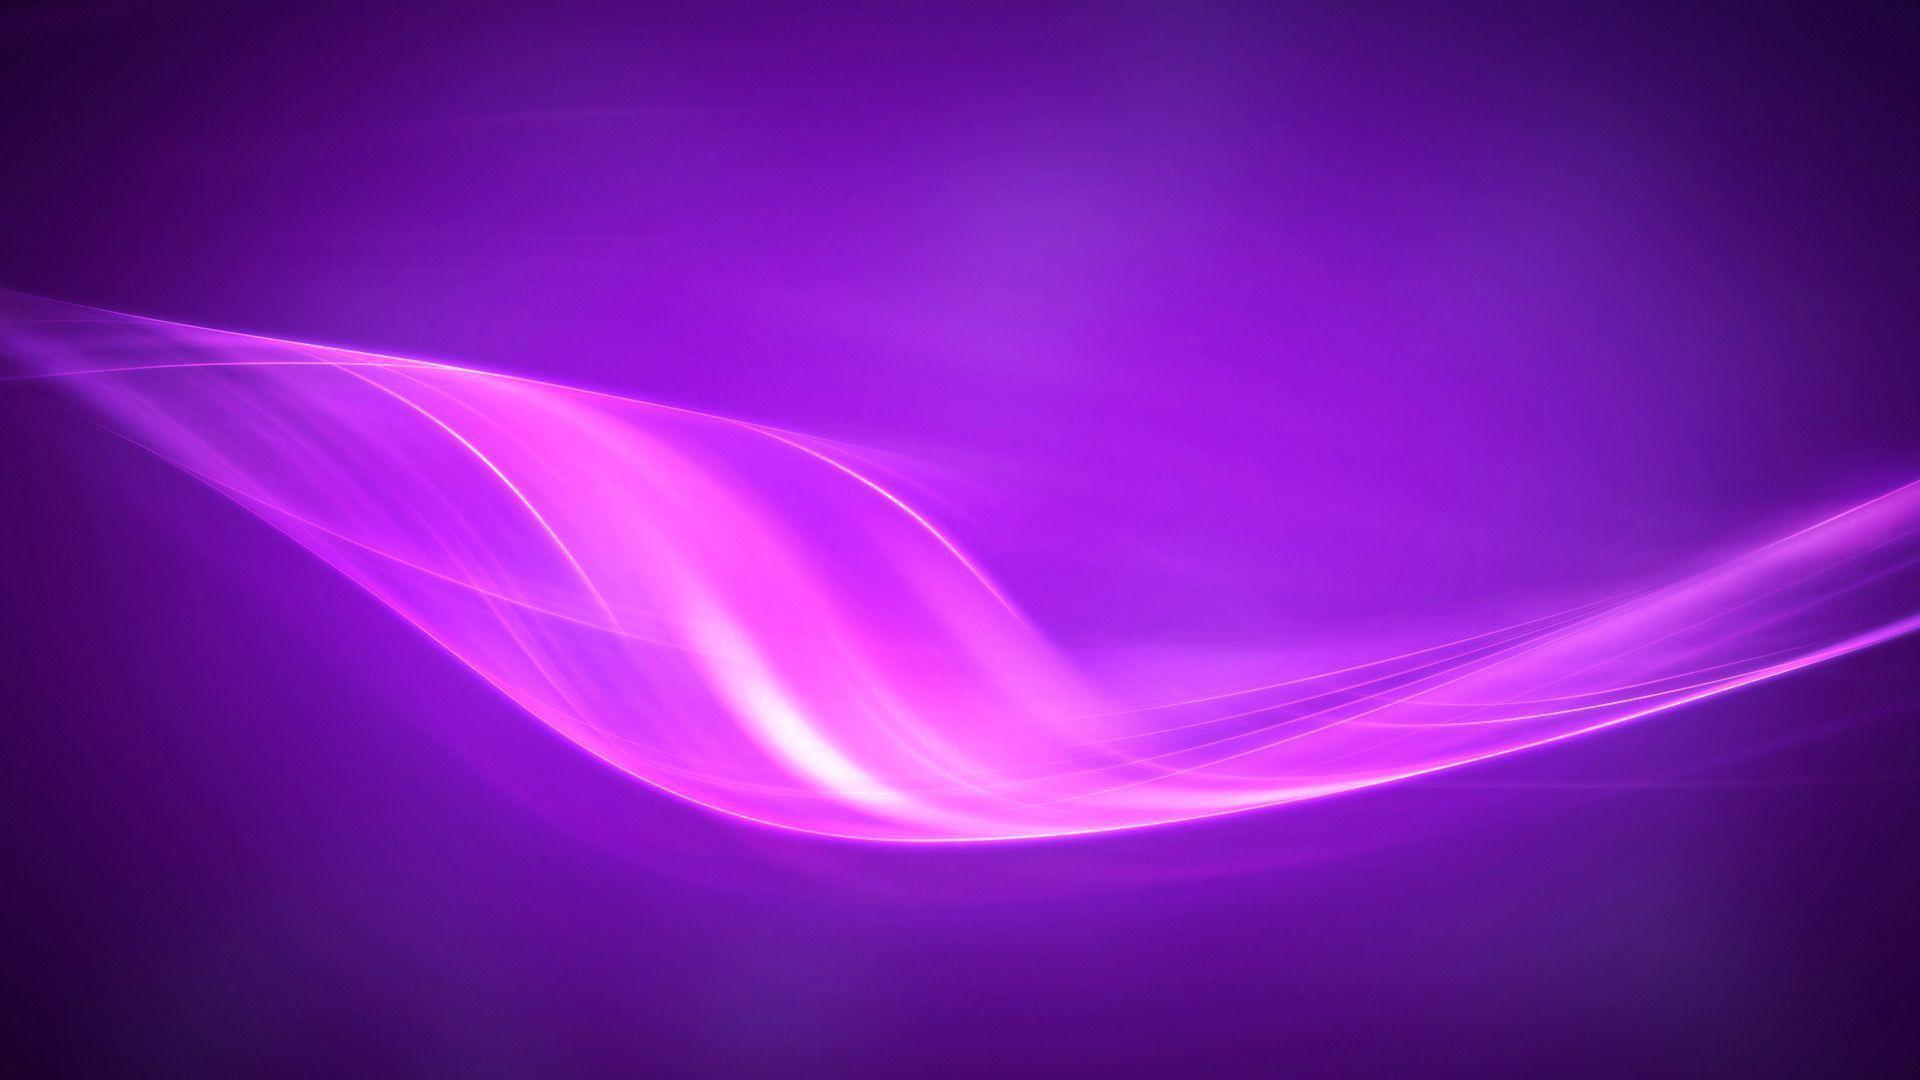 Wallpaper For > Abstract Background Designs Purple